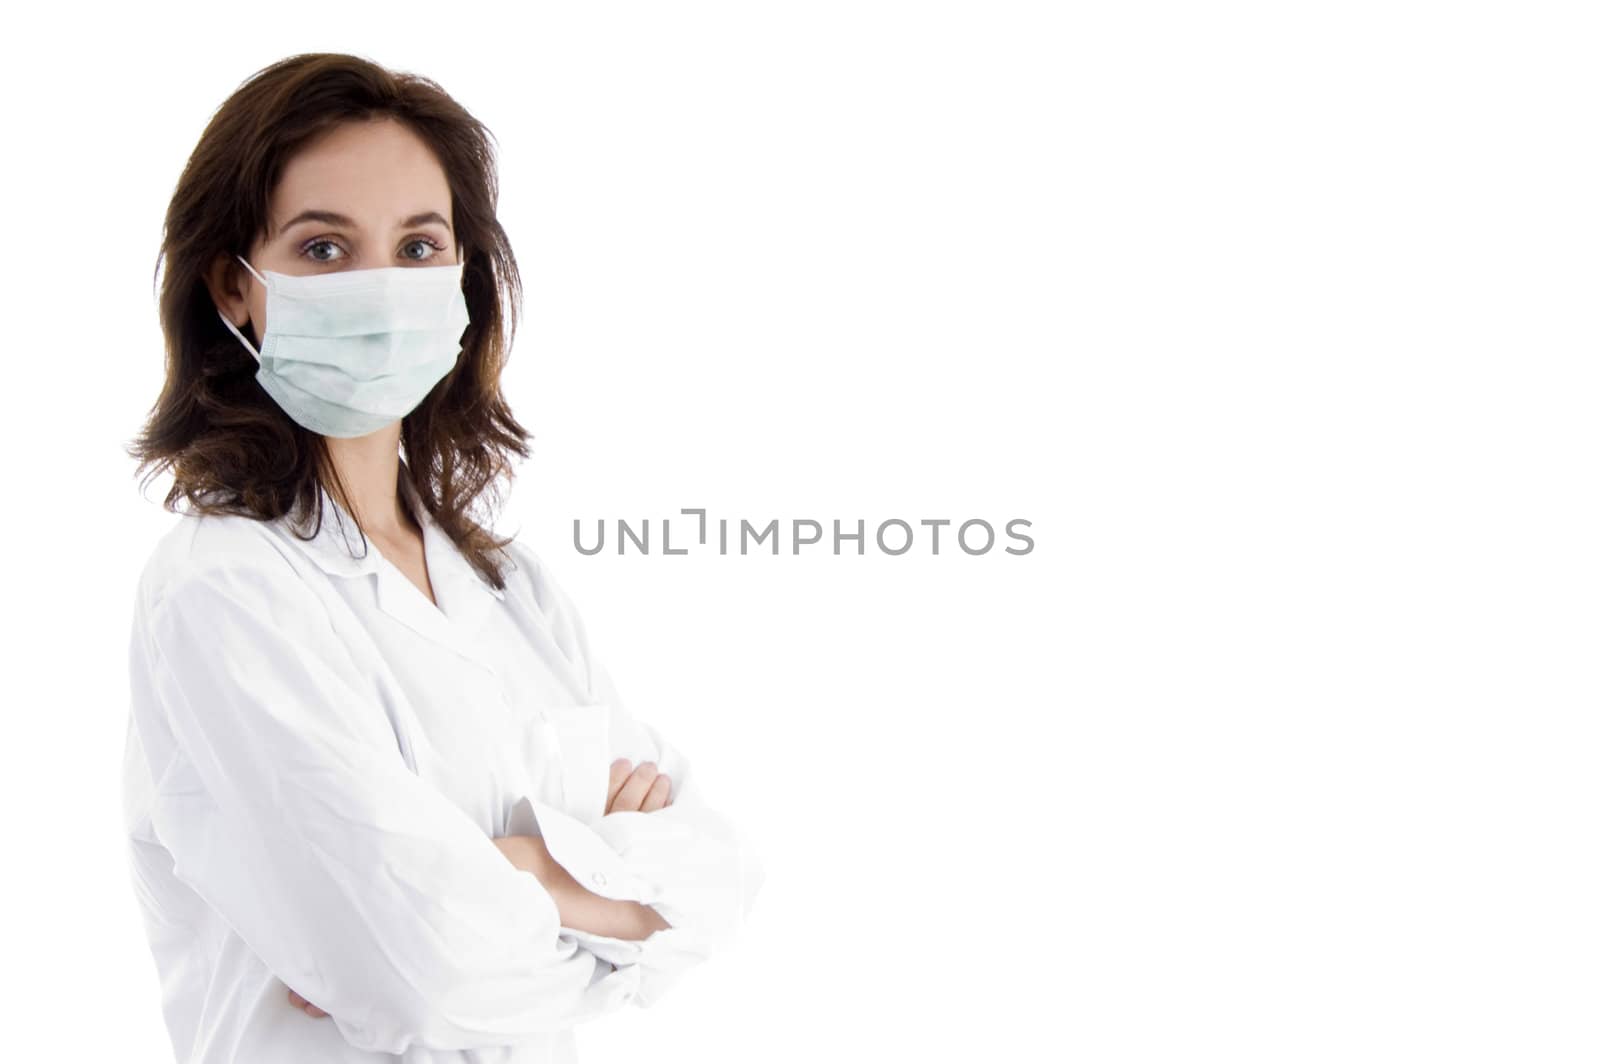 pose of doctor with facemask on an isolated white background